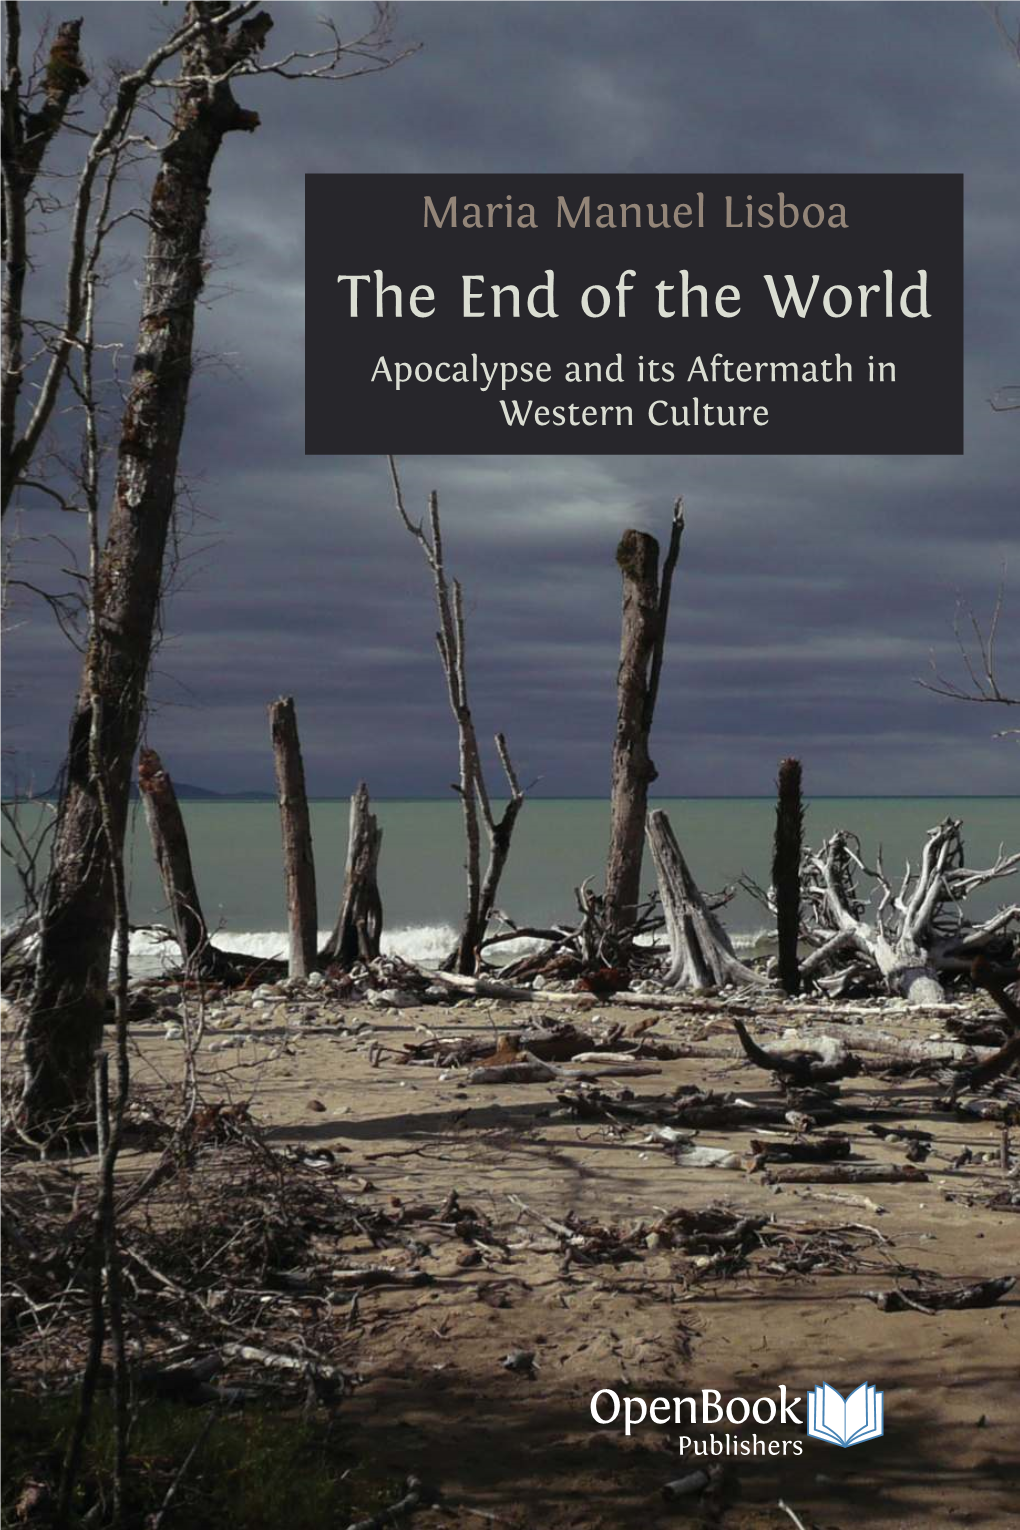 The End of the World Apocalypse and Its Aftermath in Western Culture